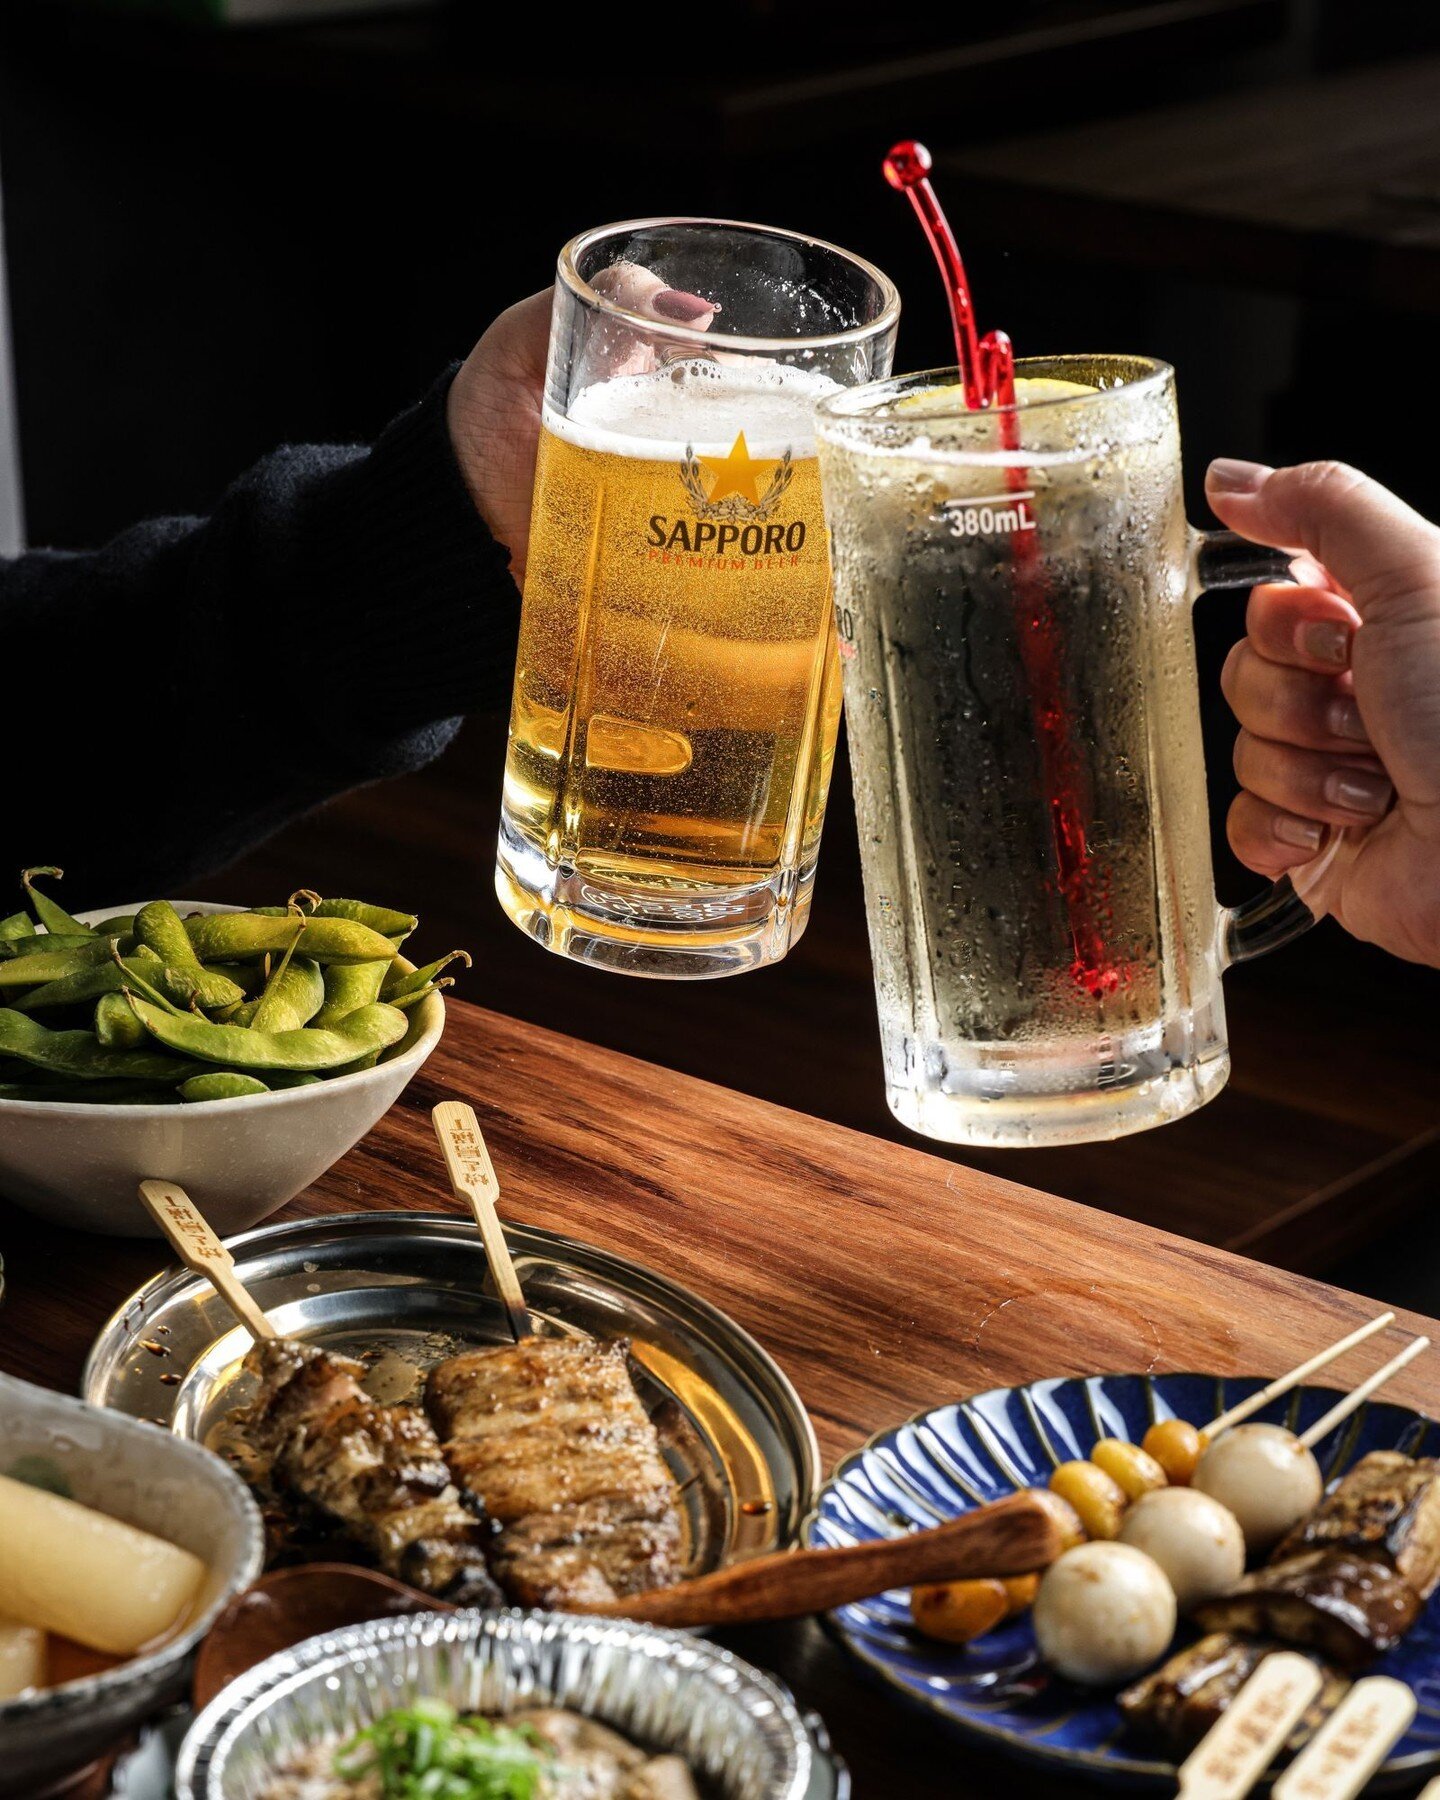 Cheers our way to the weekend! 🙌🍻

Don't forget to check out our drink menu, with both alcohol and non-alcohol options, we sure have your favourite drinks to pair with our succulent Yakitori skewers 😉

Regent Place | Walk-in only

-
#yakitoriyokoc